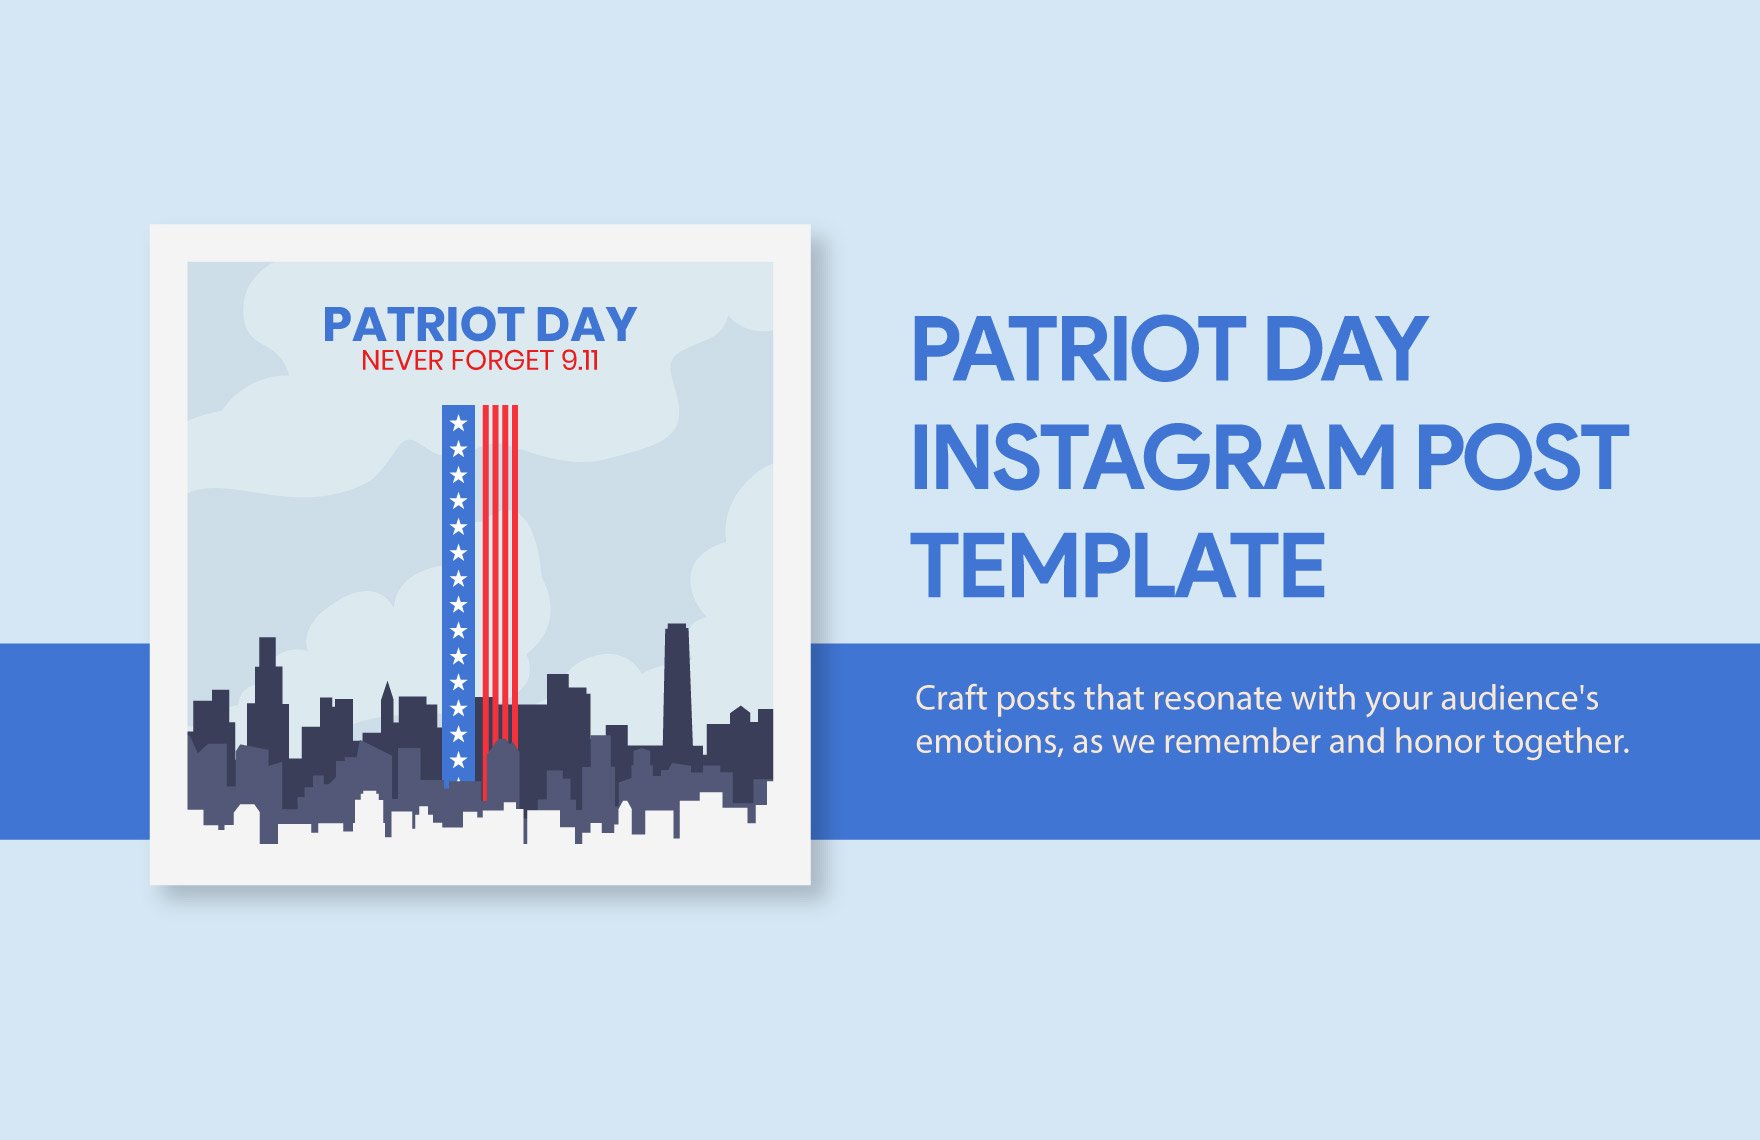 Free Patriot Day Instagram Post Template in Illustrator, PSD, PNG